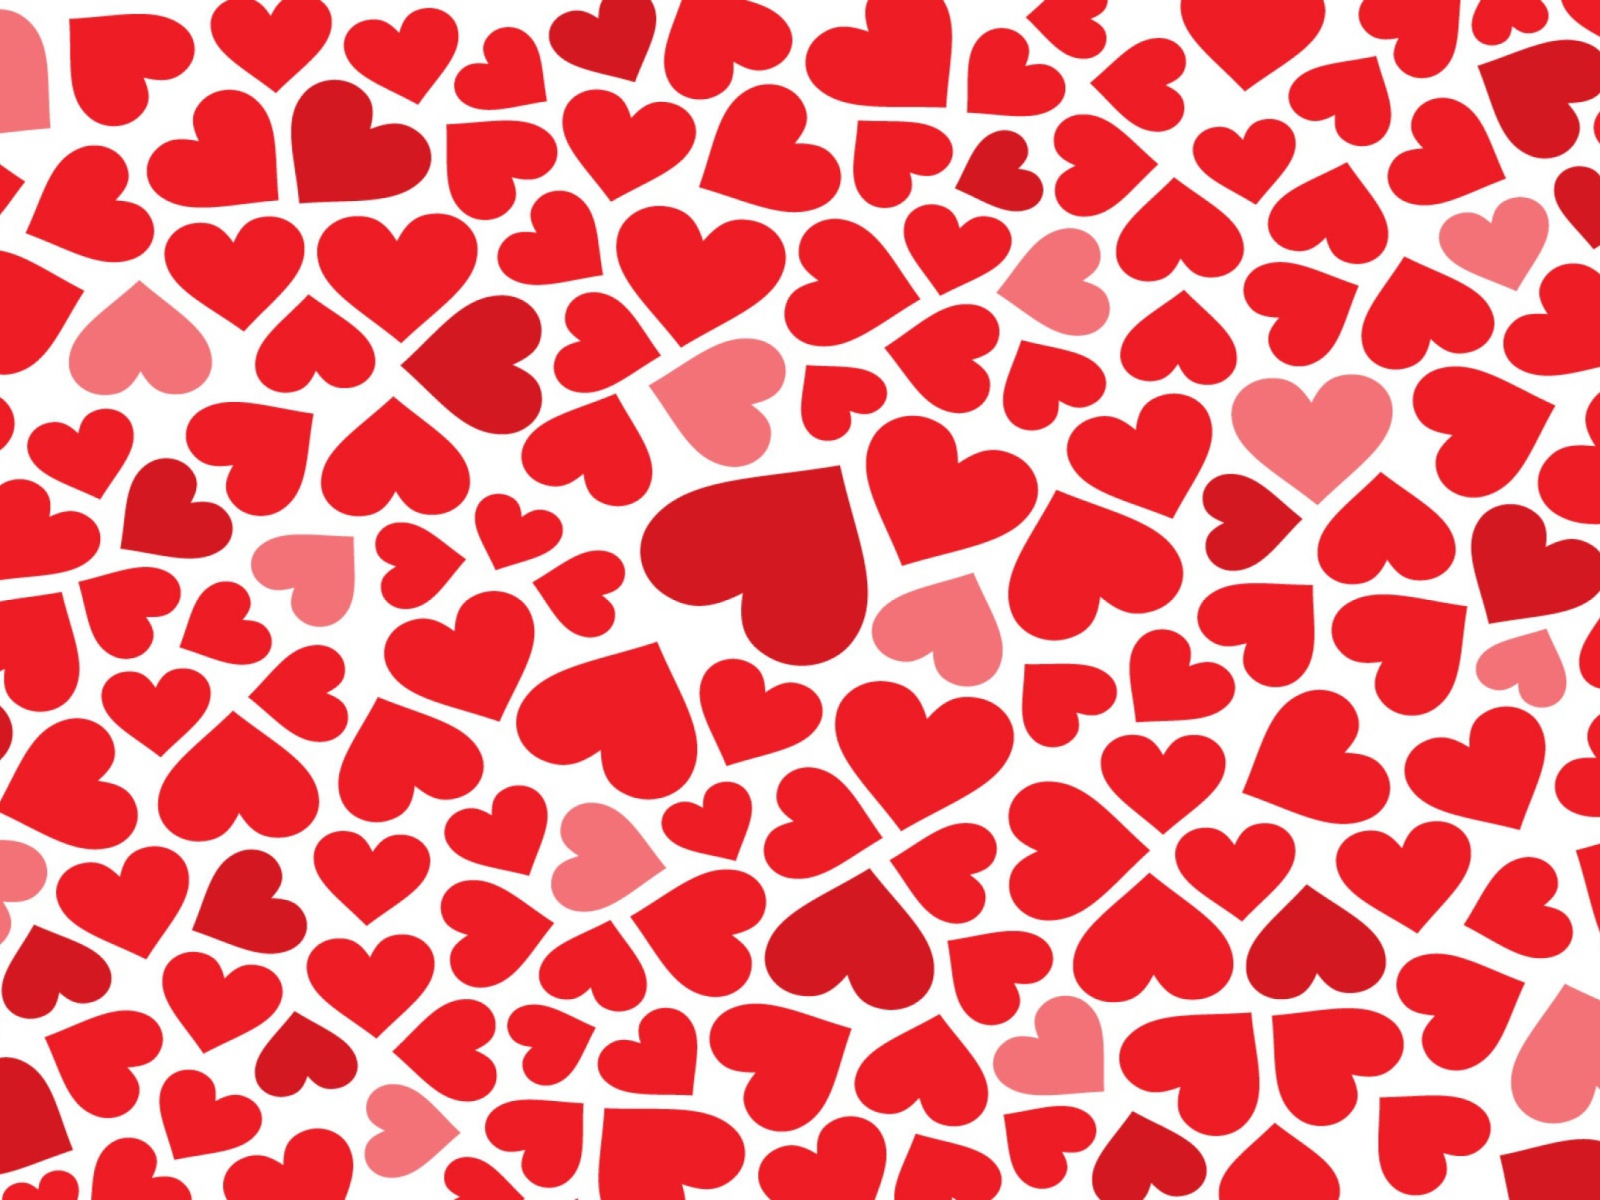 Red Hearts wallpaper 1600x1200